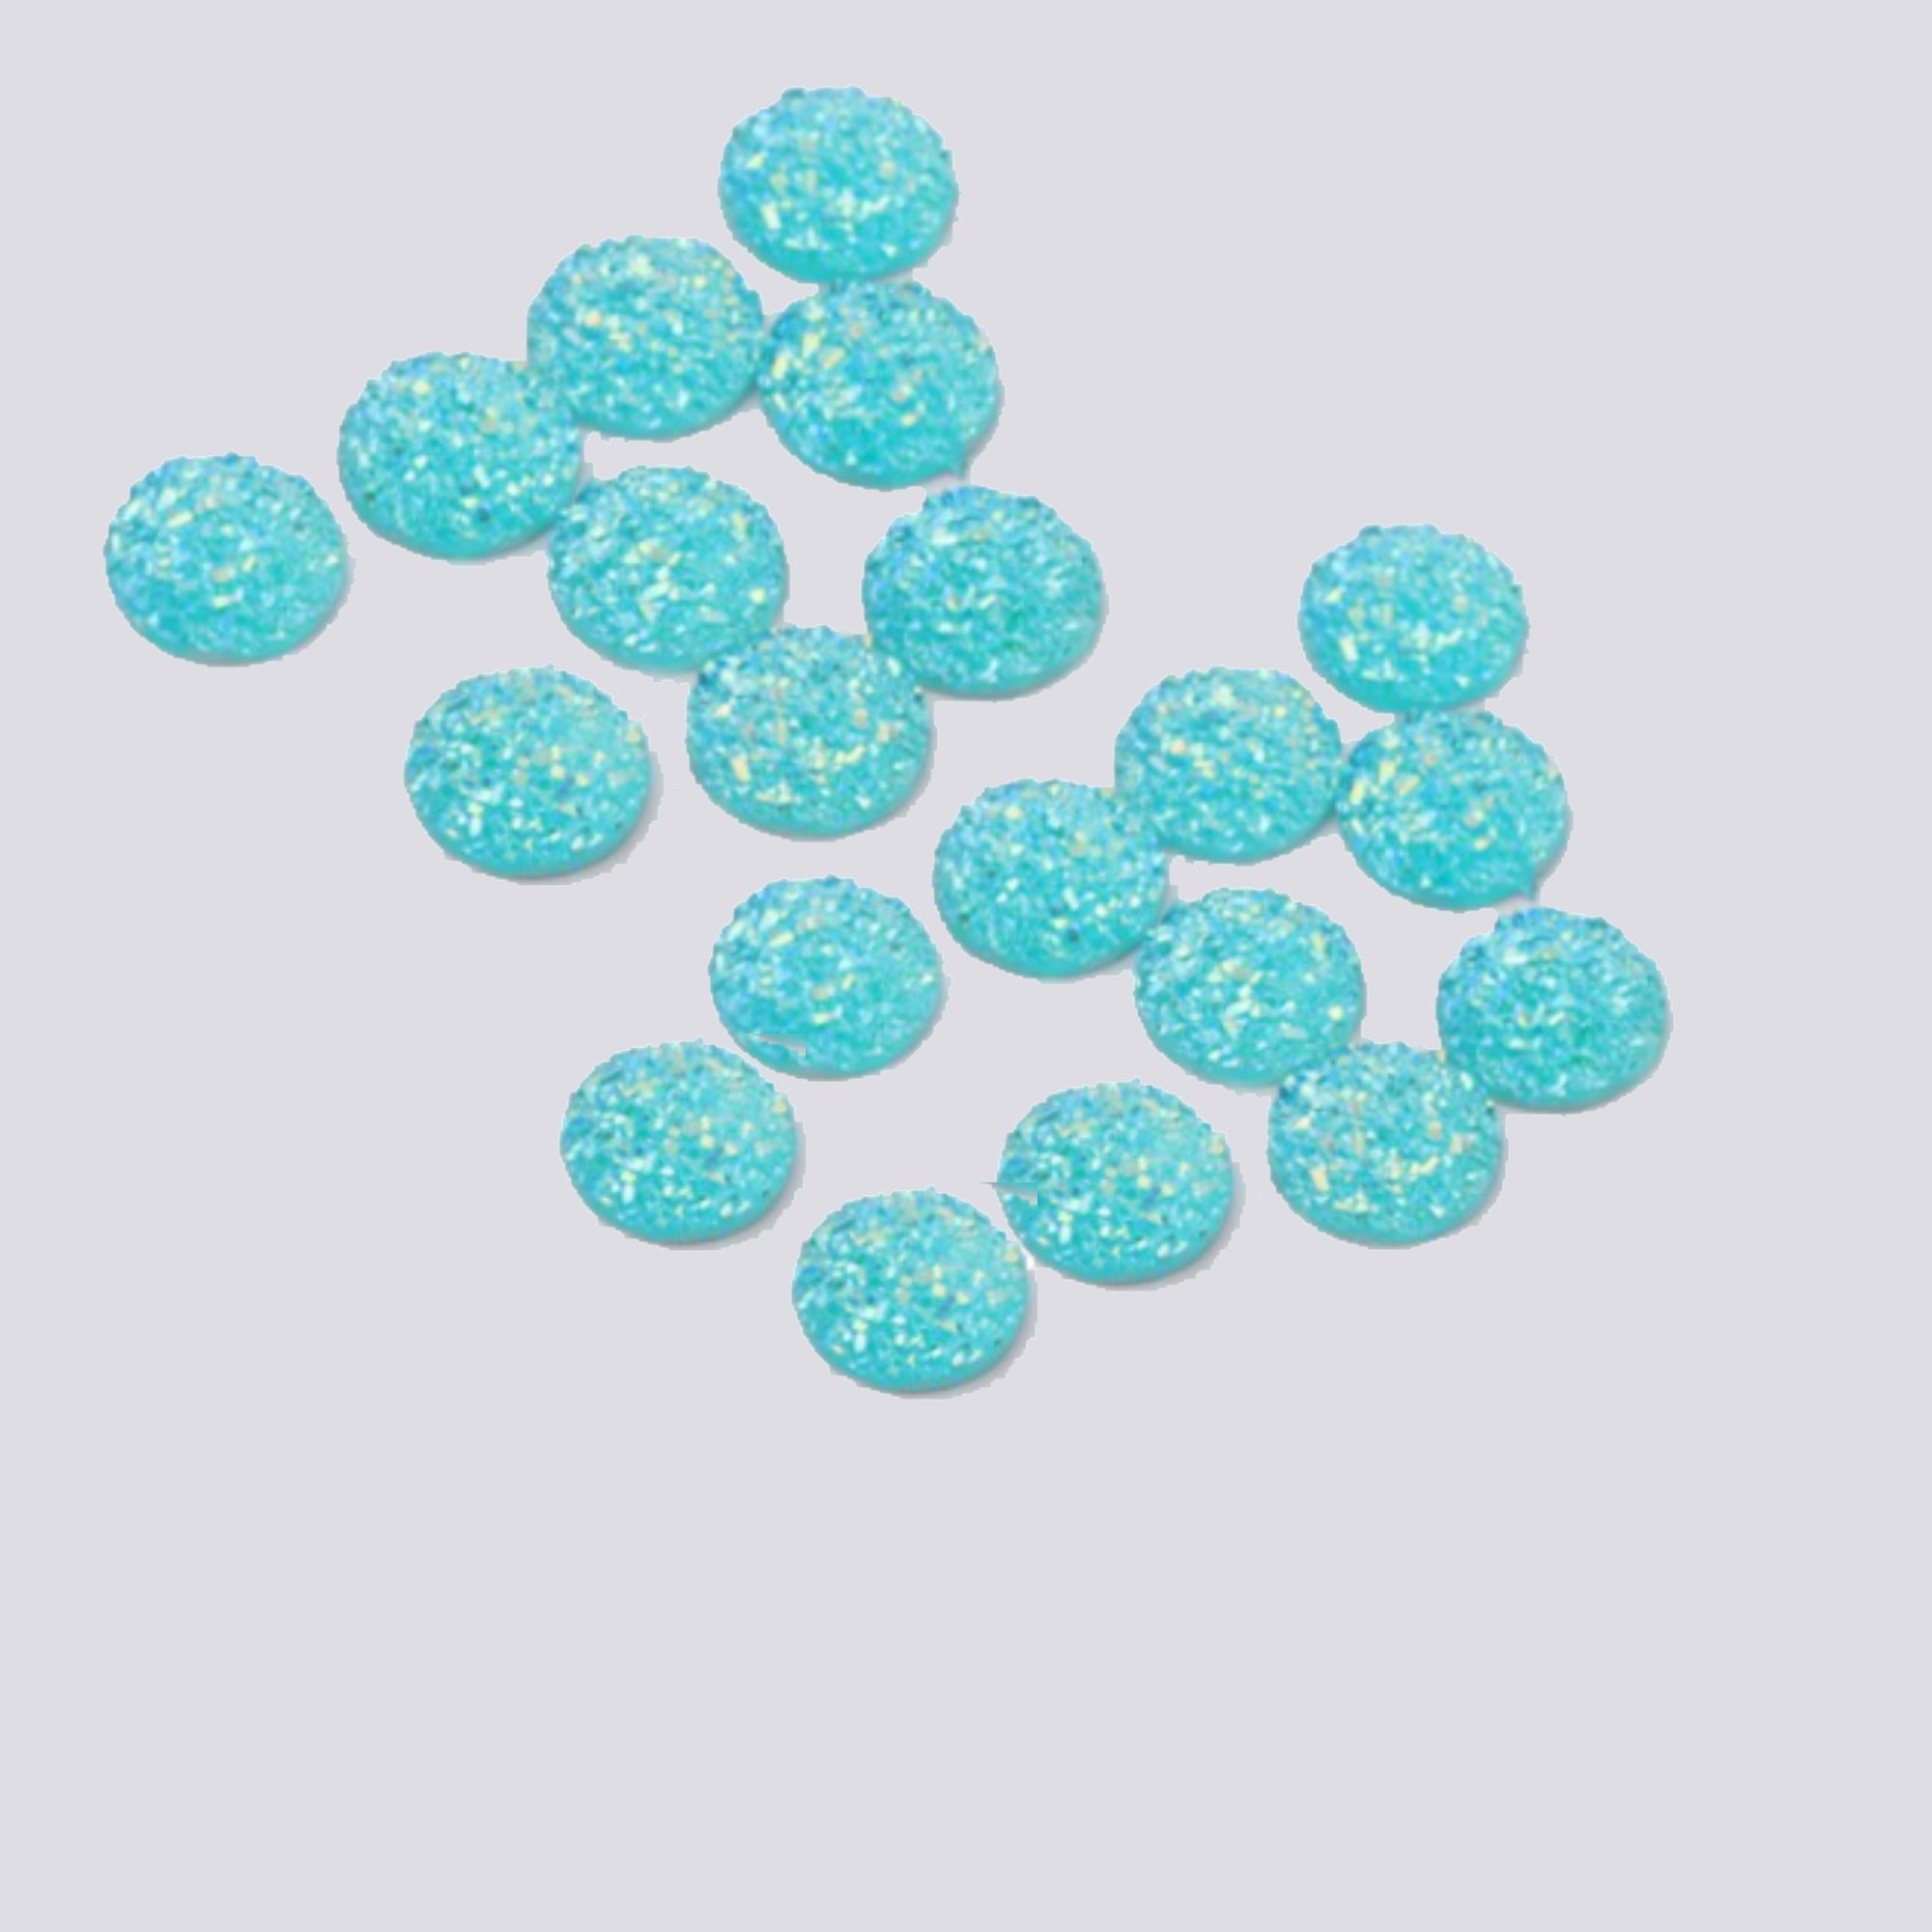 Bling It Up Collection 3/8" Turquoise Chunky Round Bling - Pkg. of 20